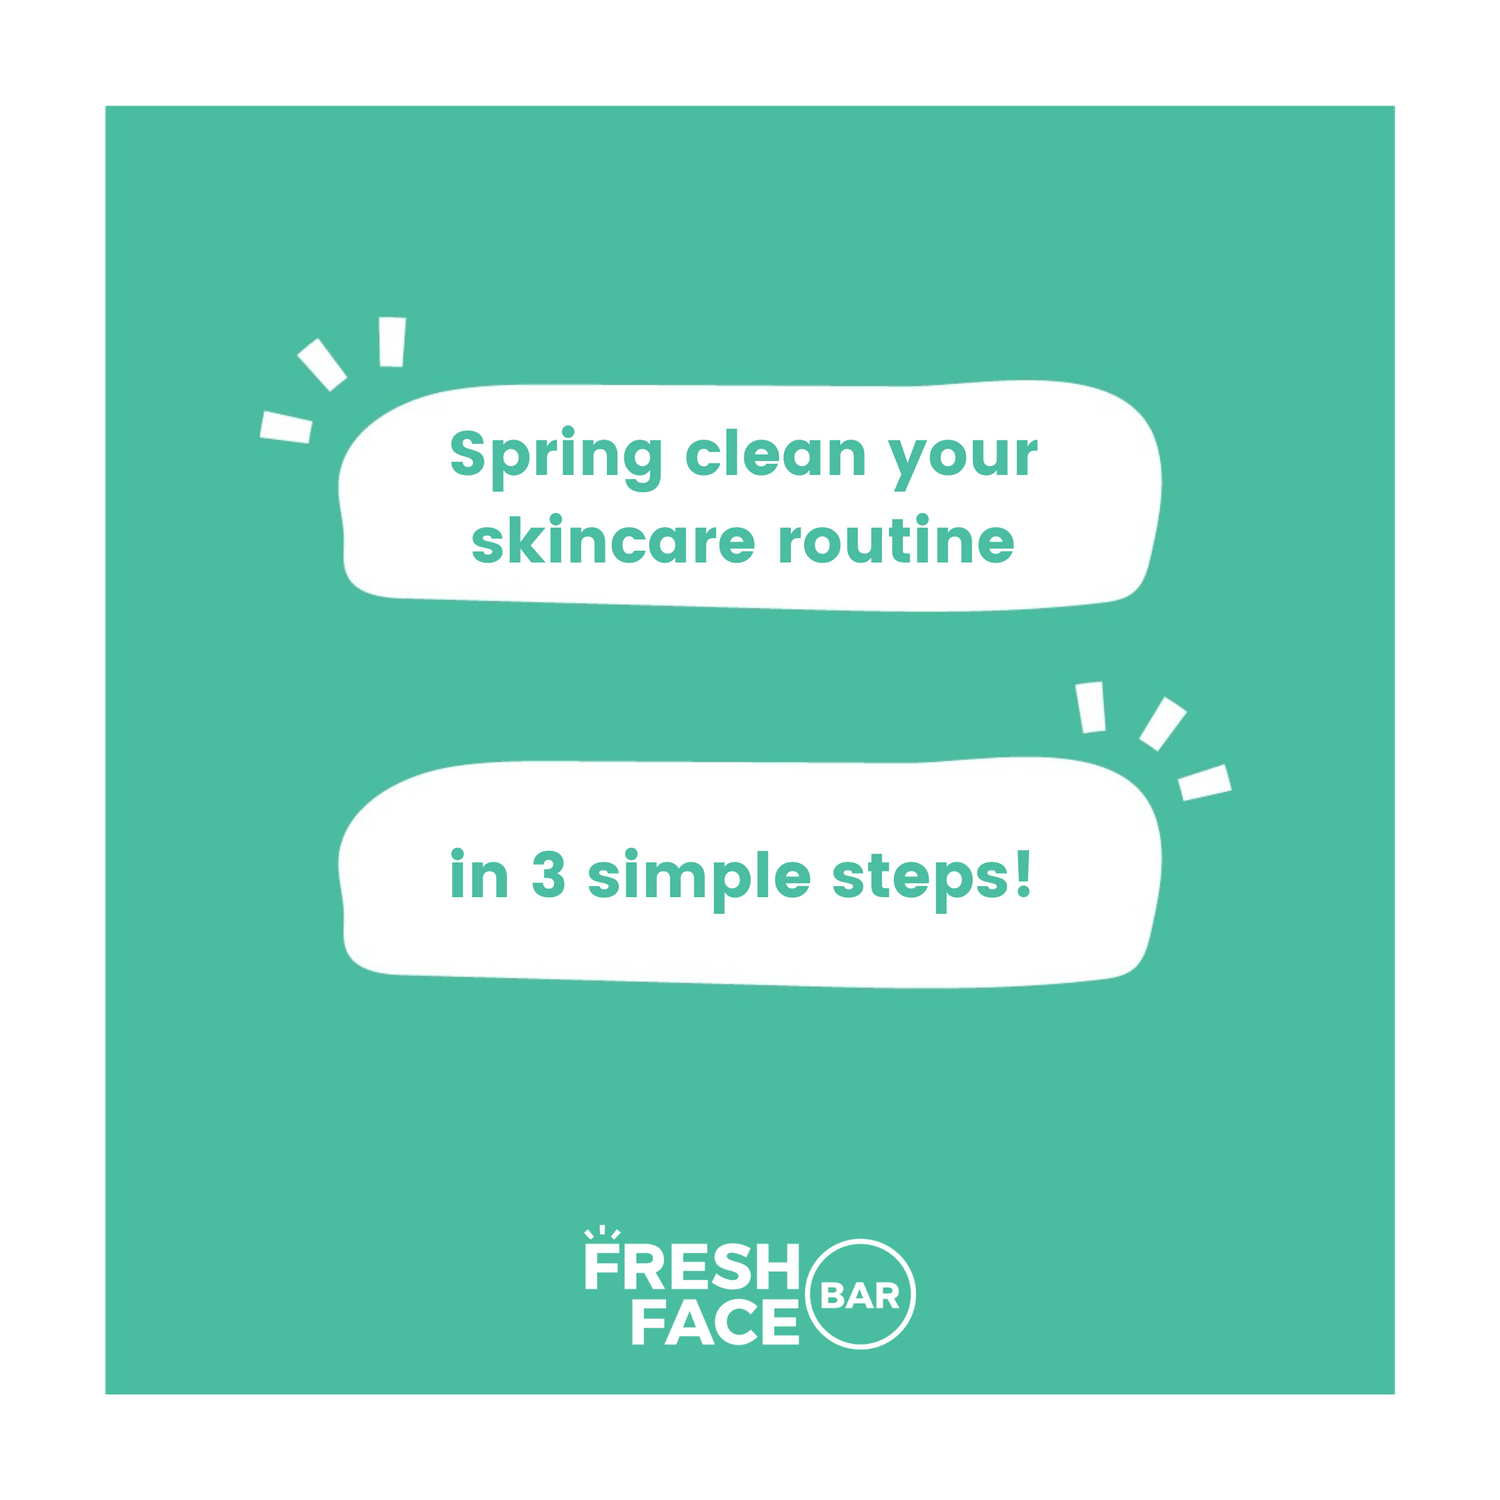 Spring Clean Your Skincare Routine in 3 Simple Steps!